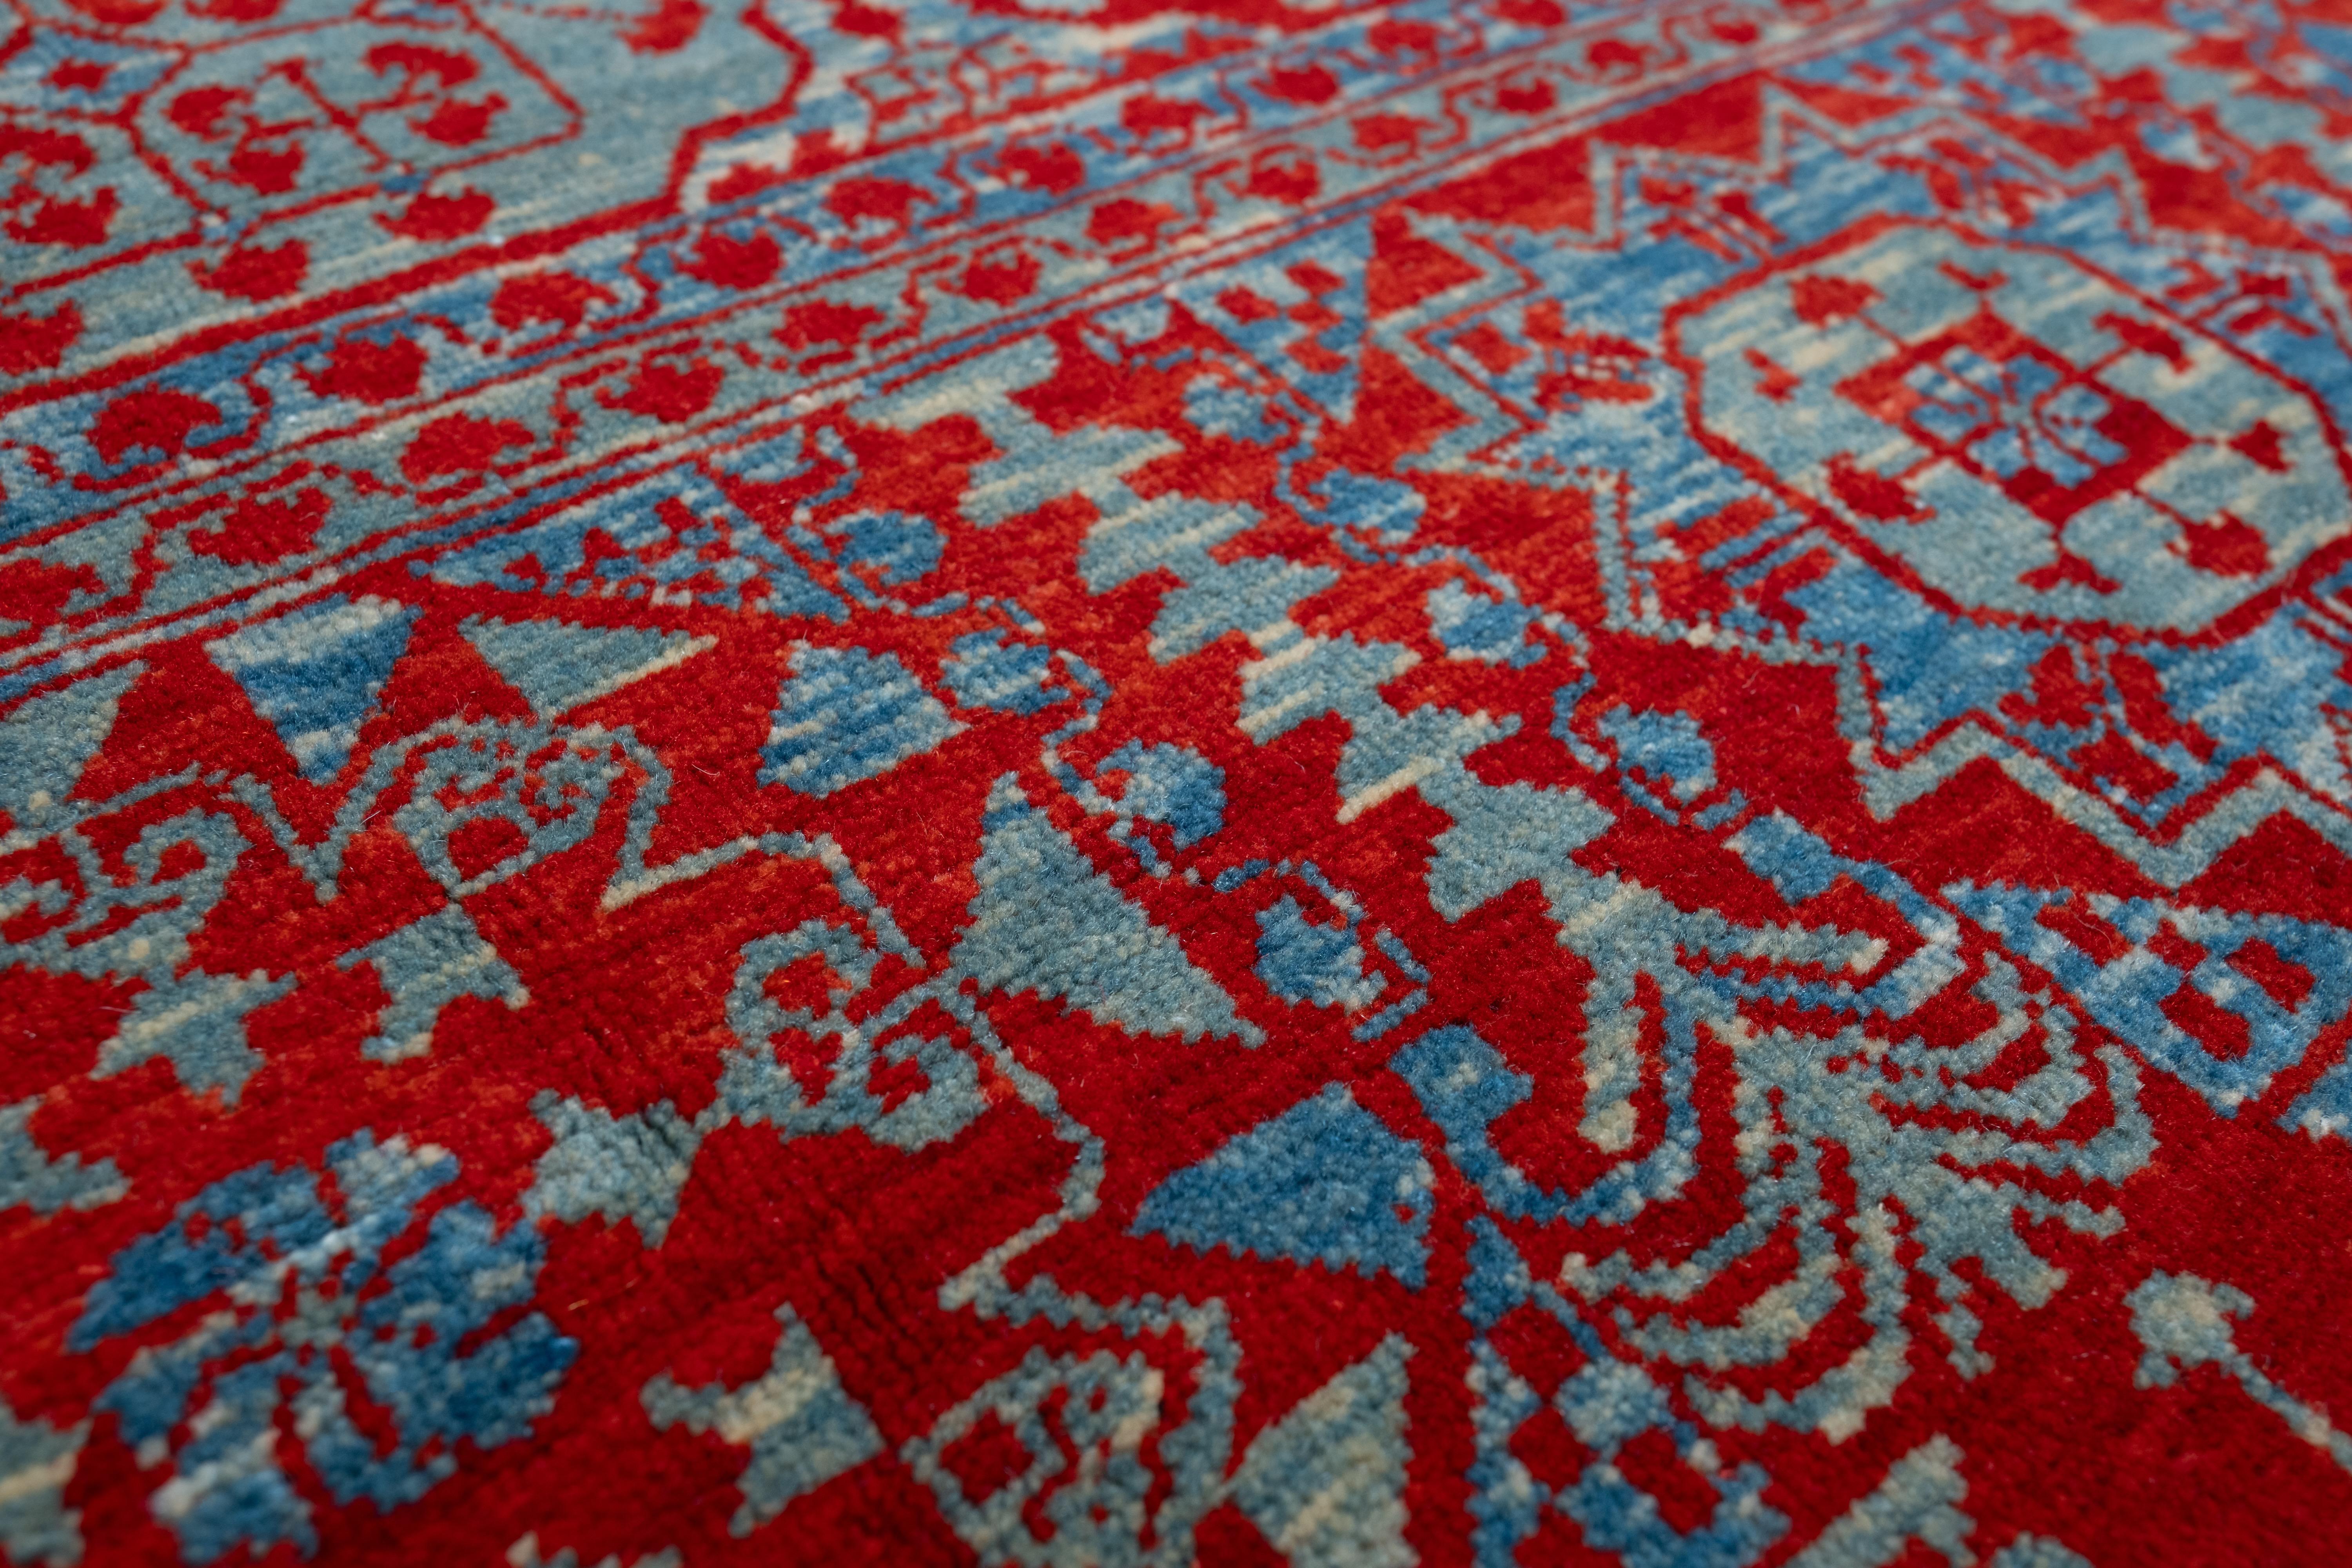 Contemporary Ararat Rugs Mamluk Rug with Central Star 16th Cent. Revival Carpet Natural Dyed For Sale